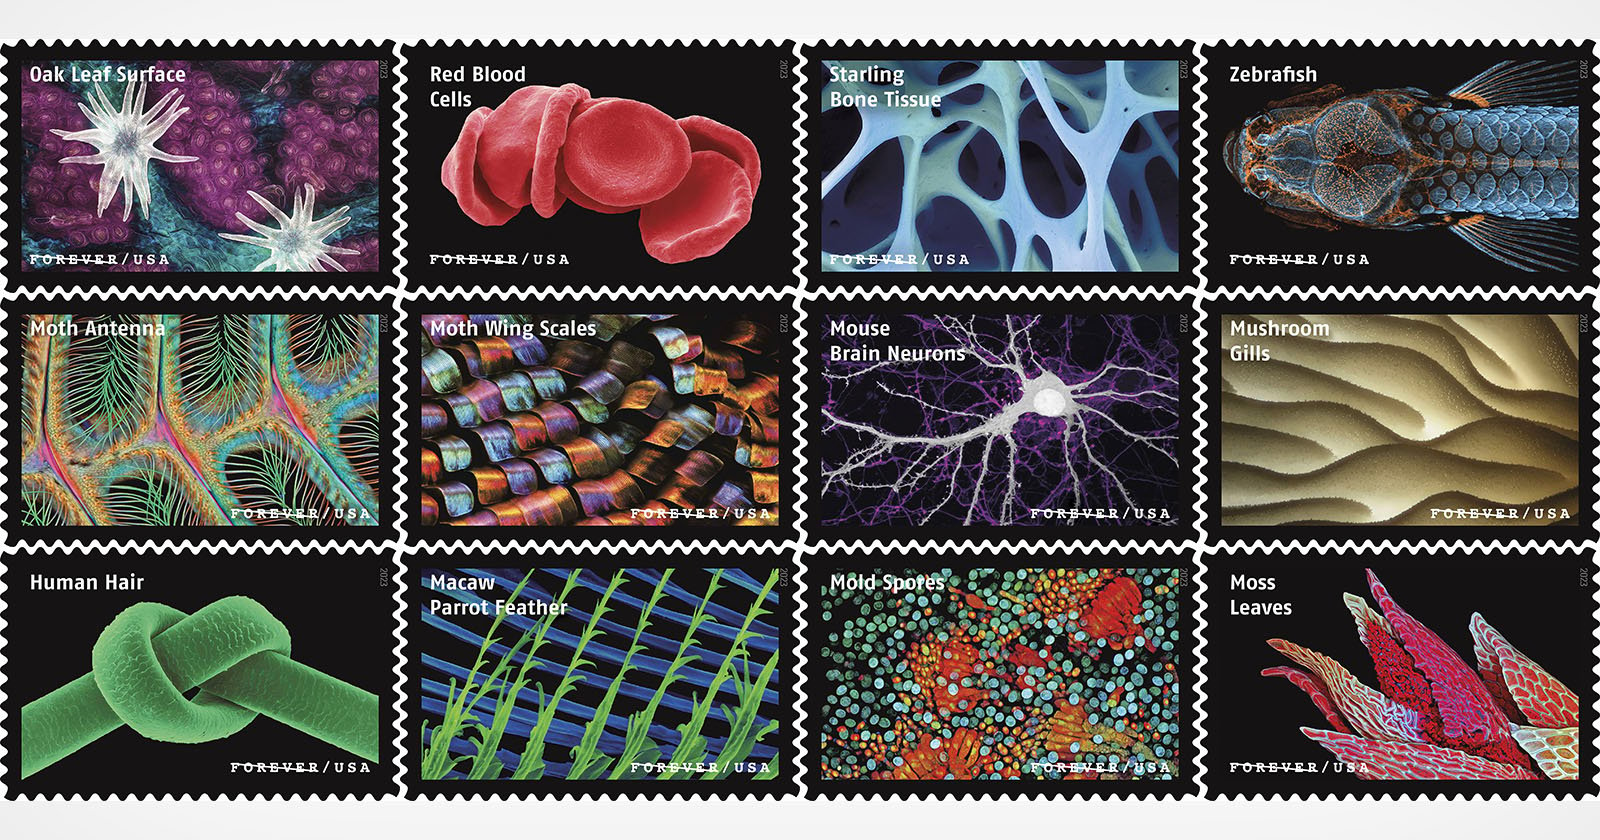 New US Postal Service Stamps Feature Beautiful Photos of Microscopic Life